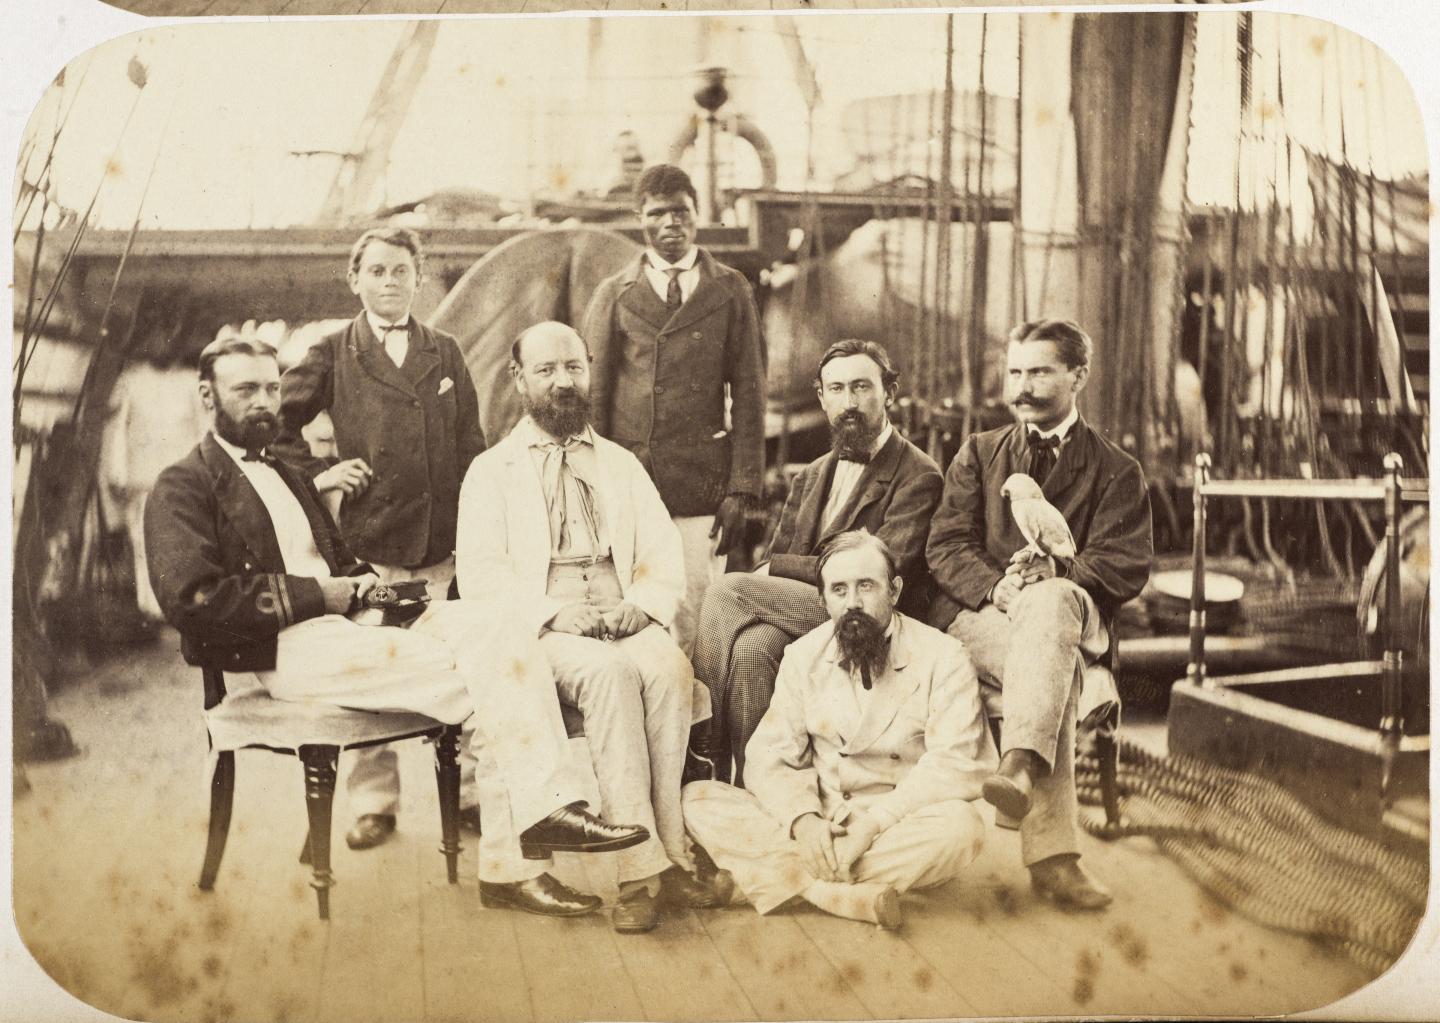 Sepia-tone photograph taken on board HMS Challenger showing the naturalists and two of their assistants, part of an album of photographs from the Challenger expedition of 1875